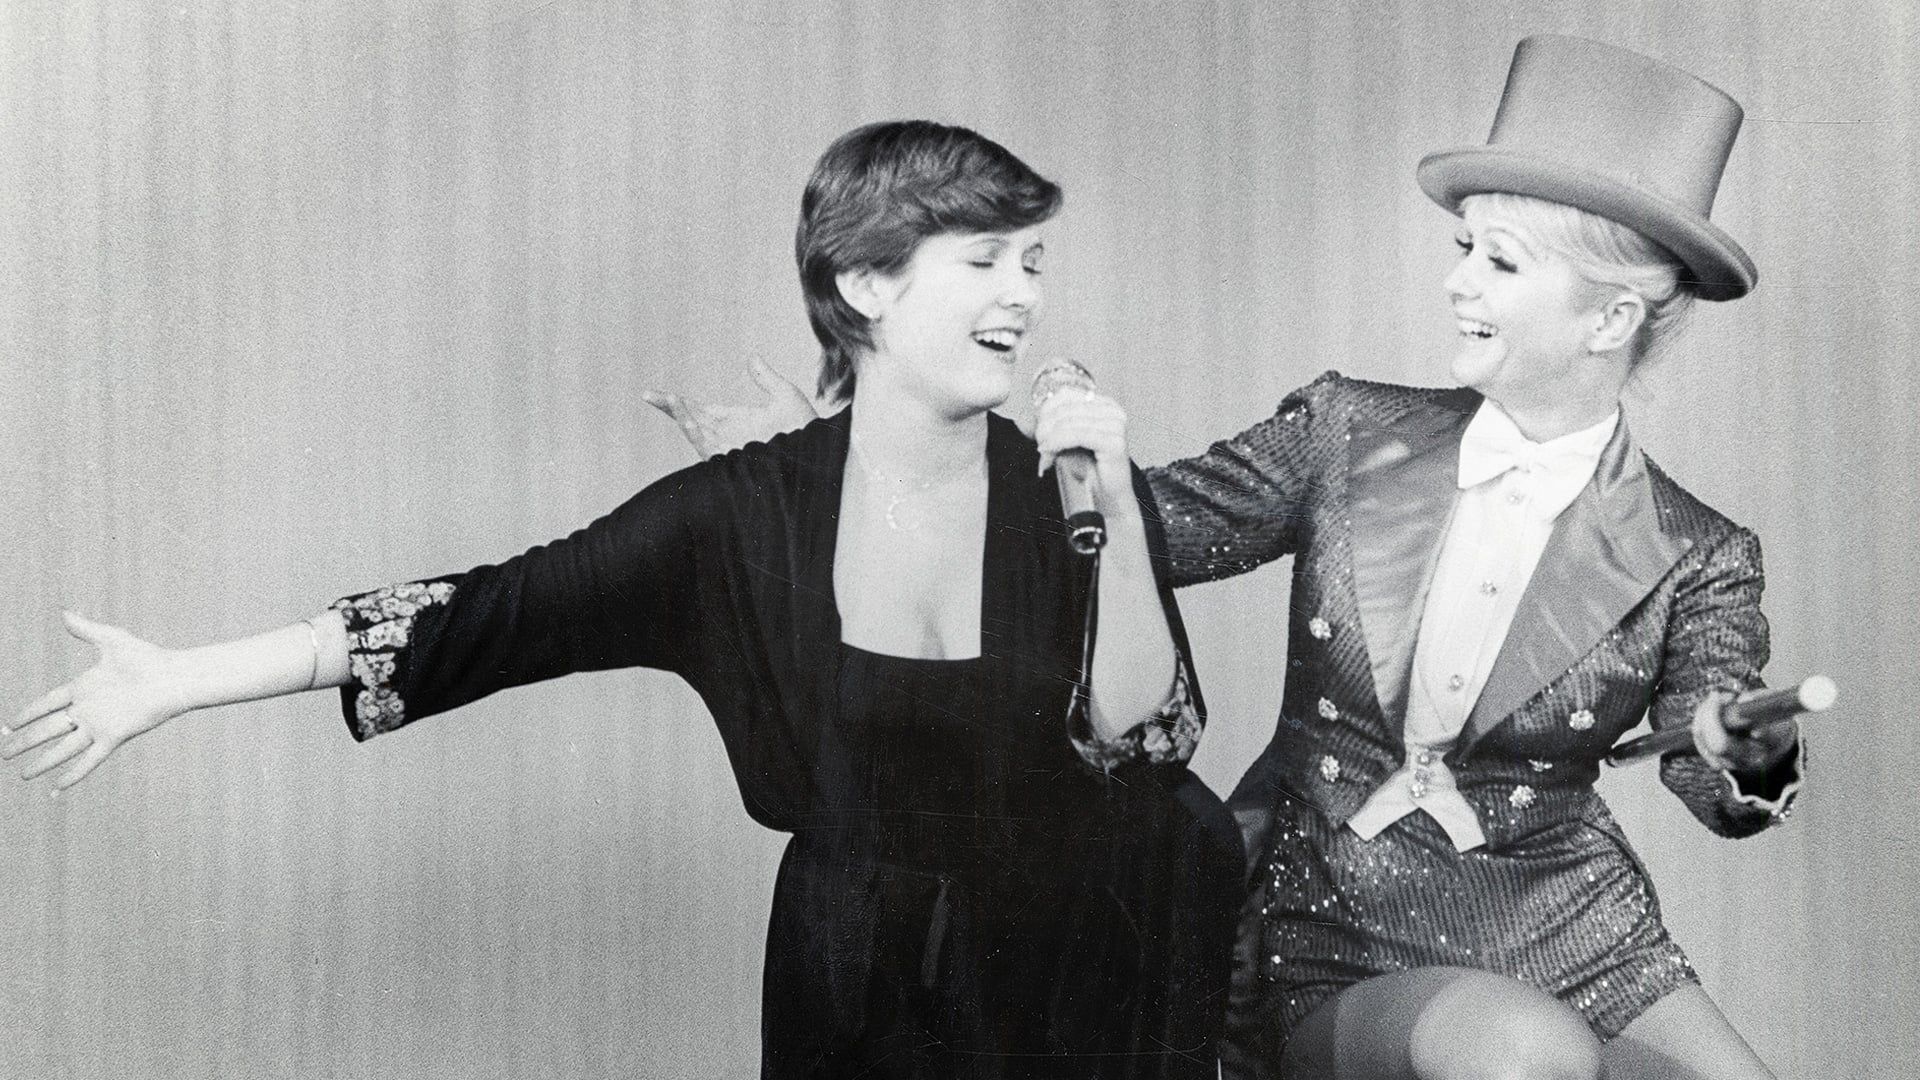 Bright Lights: Starring Carrie Fisher and Debbie Reynolds background